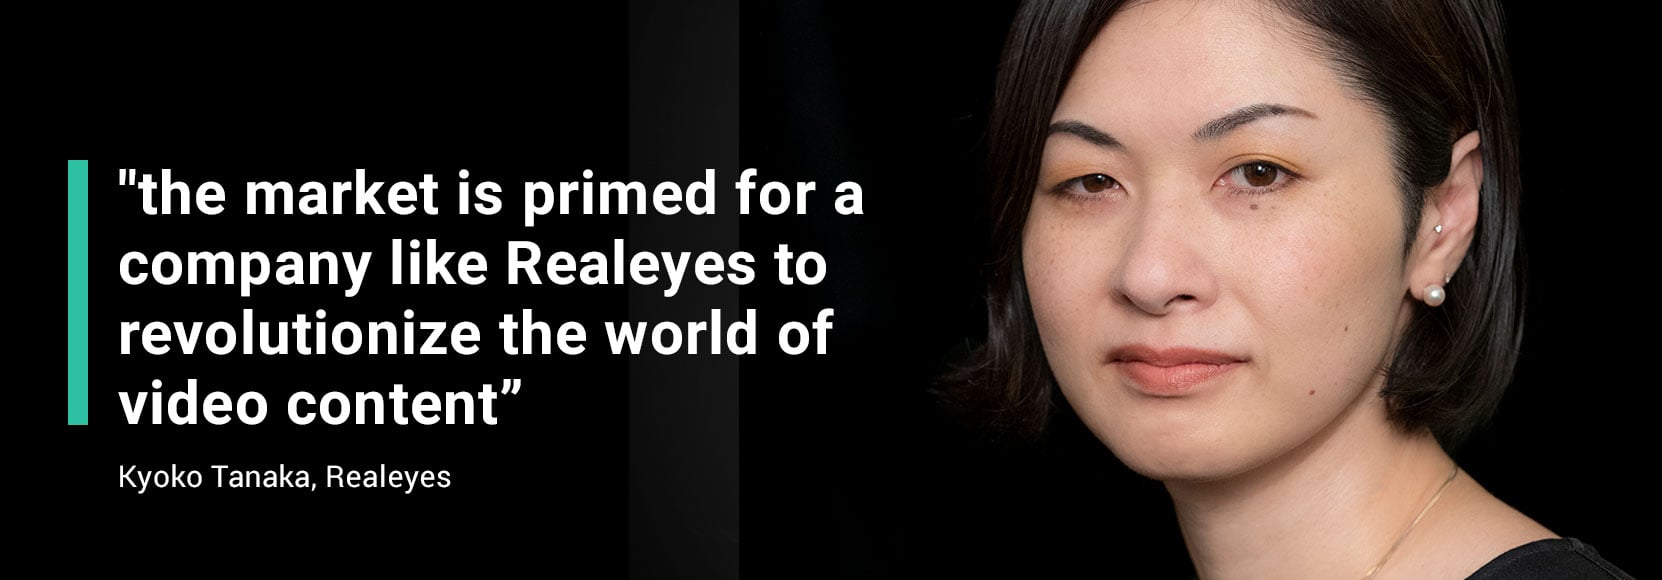 Kyoko Tanaka - Realeyes to revolutionise the world of video content